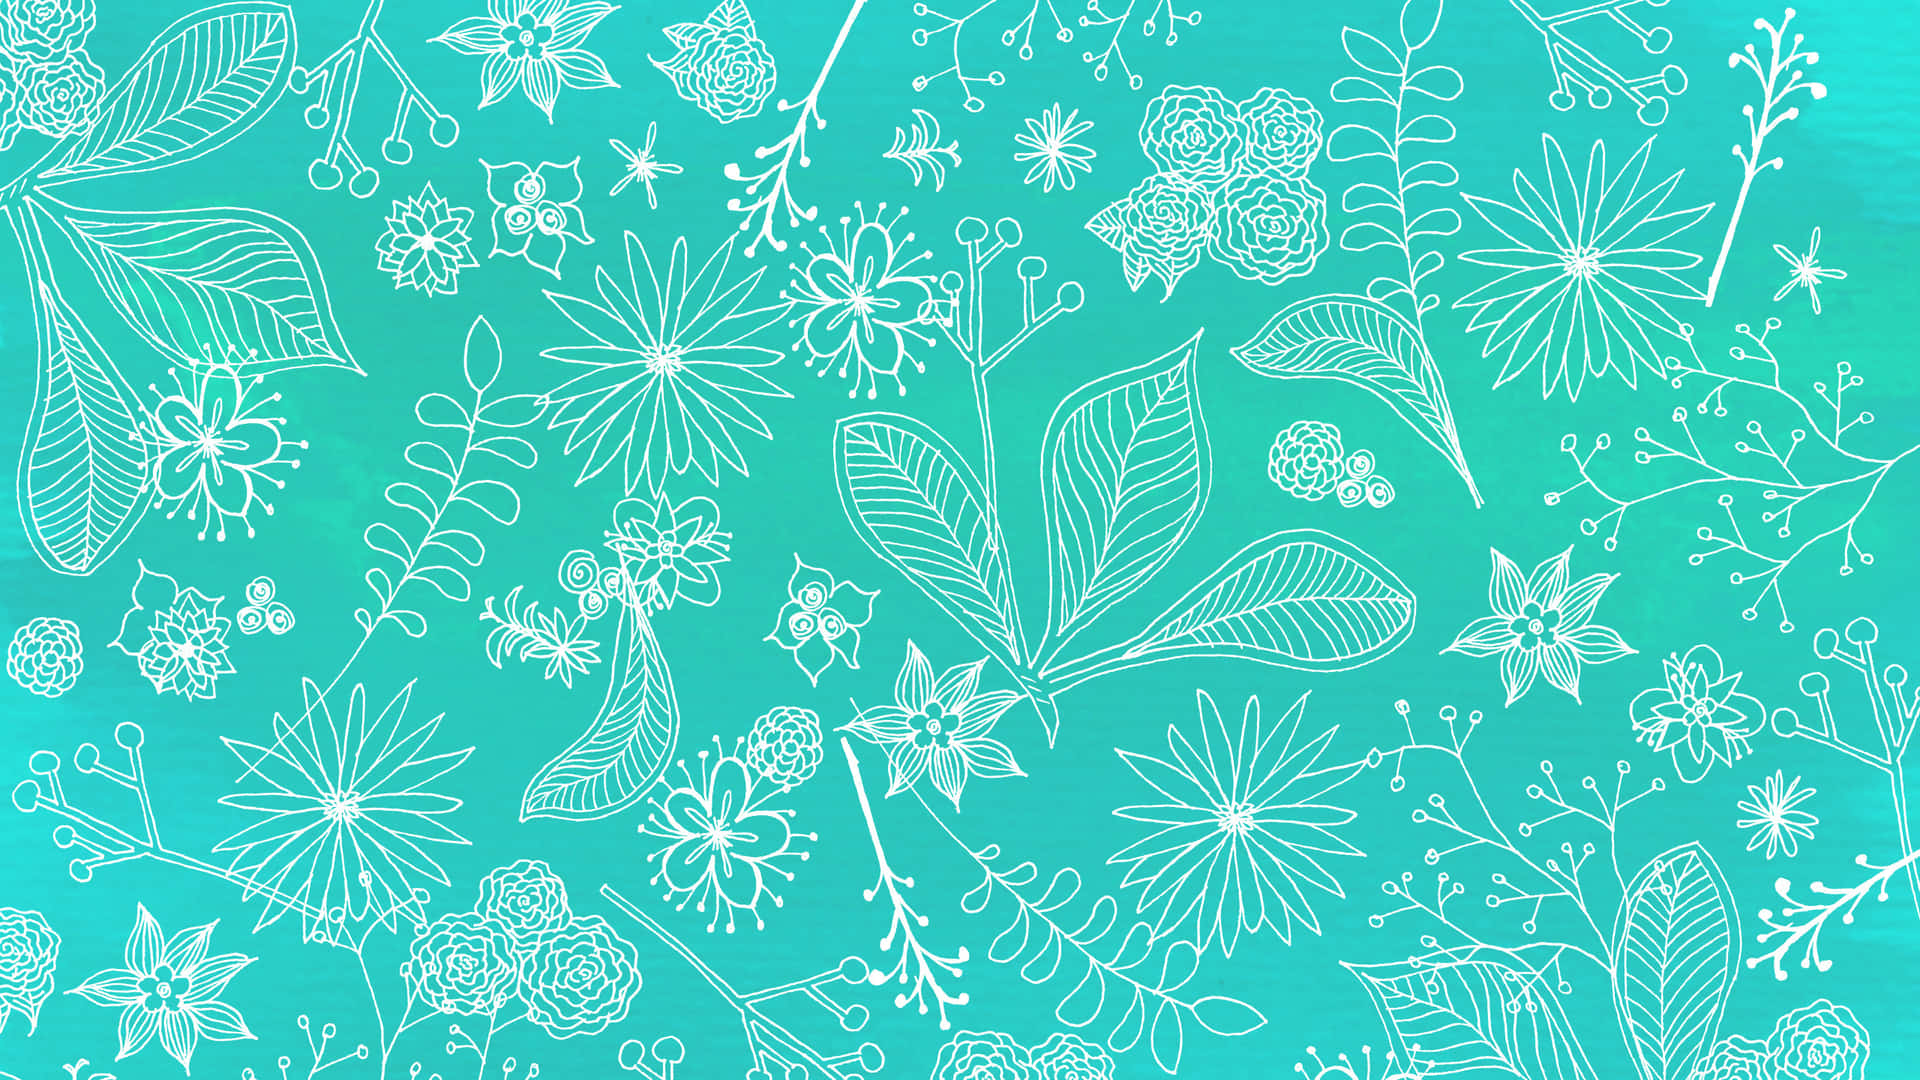 A White And Green Floral Pattern On A Turquoise Background Wallpaper